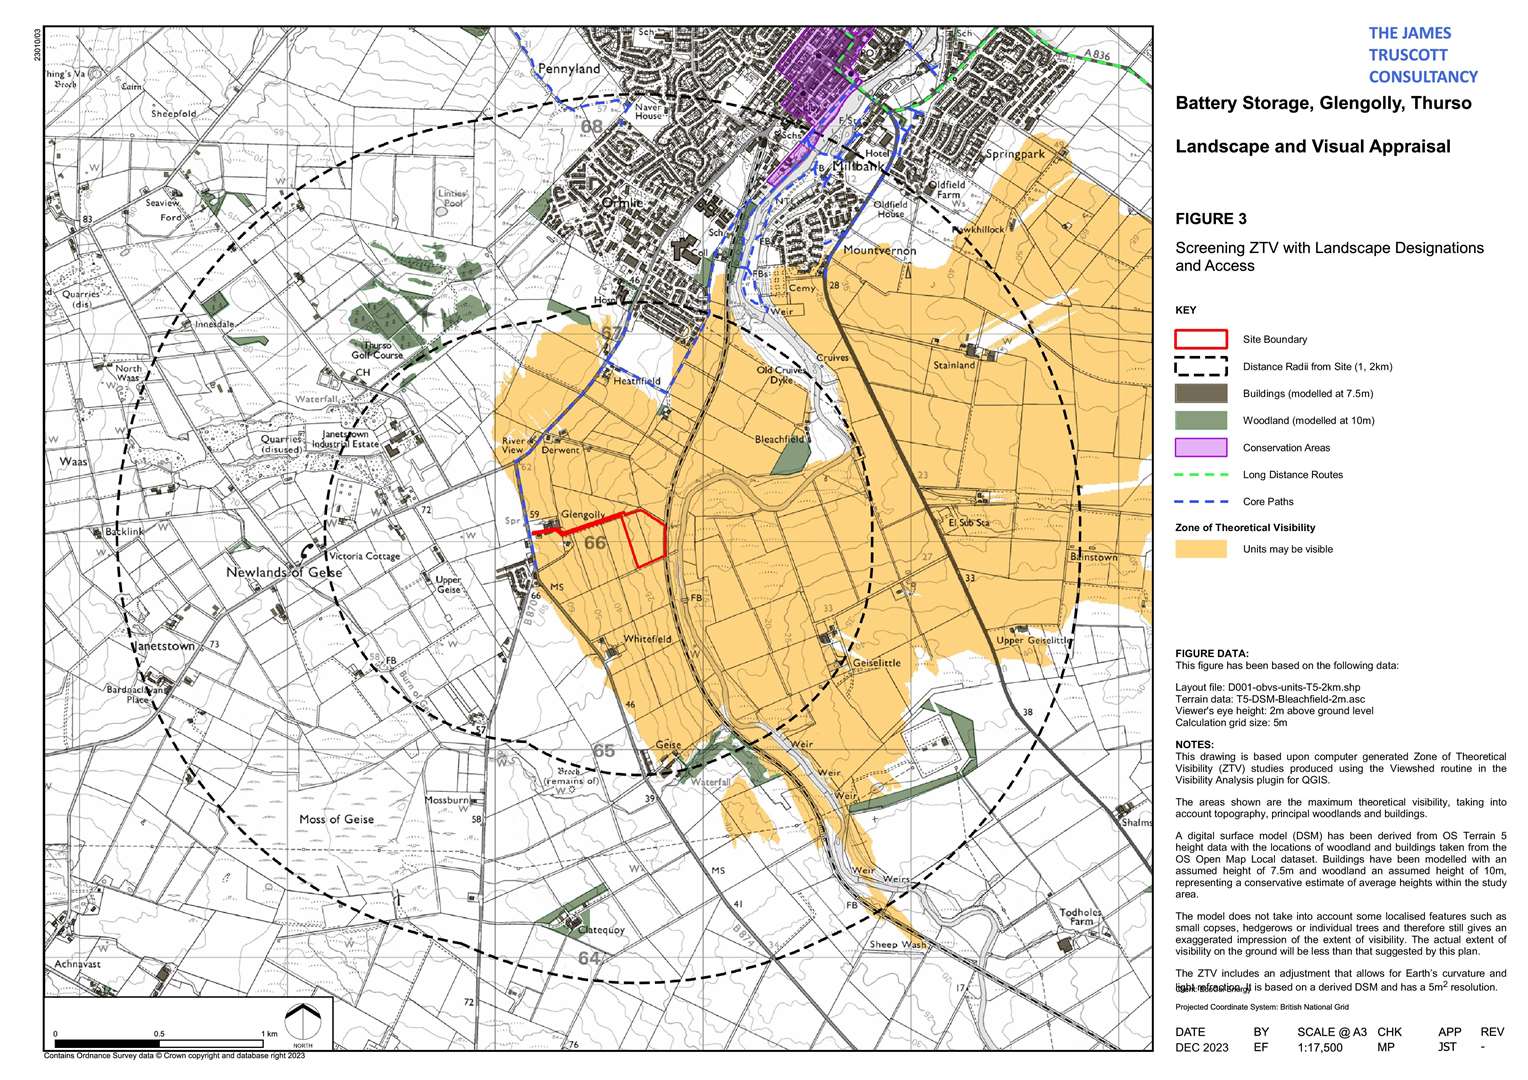 Plan of intended battery storage facility that has been lodged with Highland Council for erection at Glengolly near Thurso.